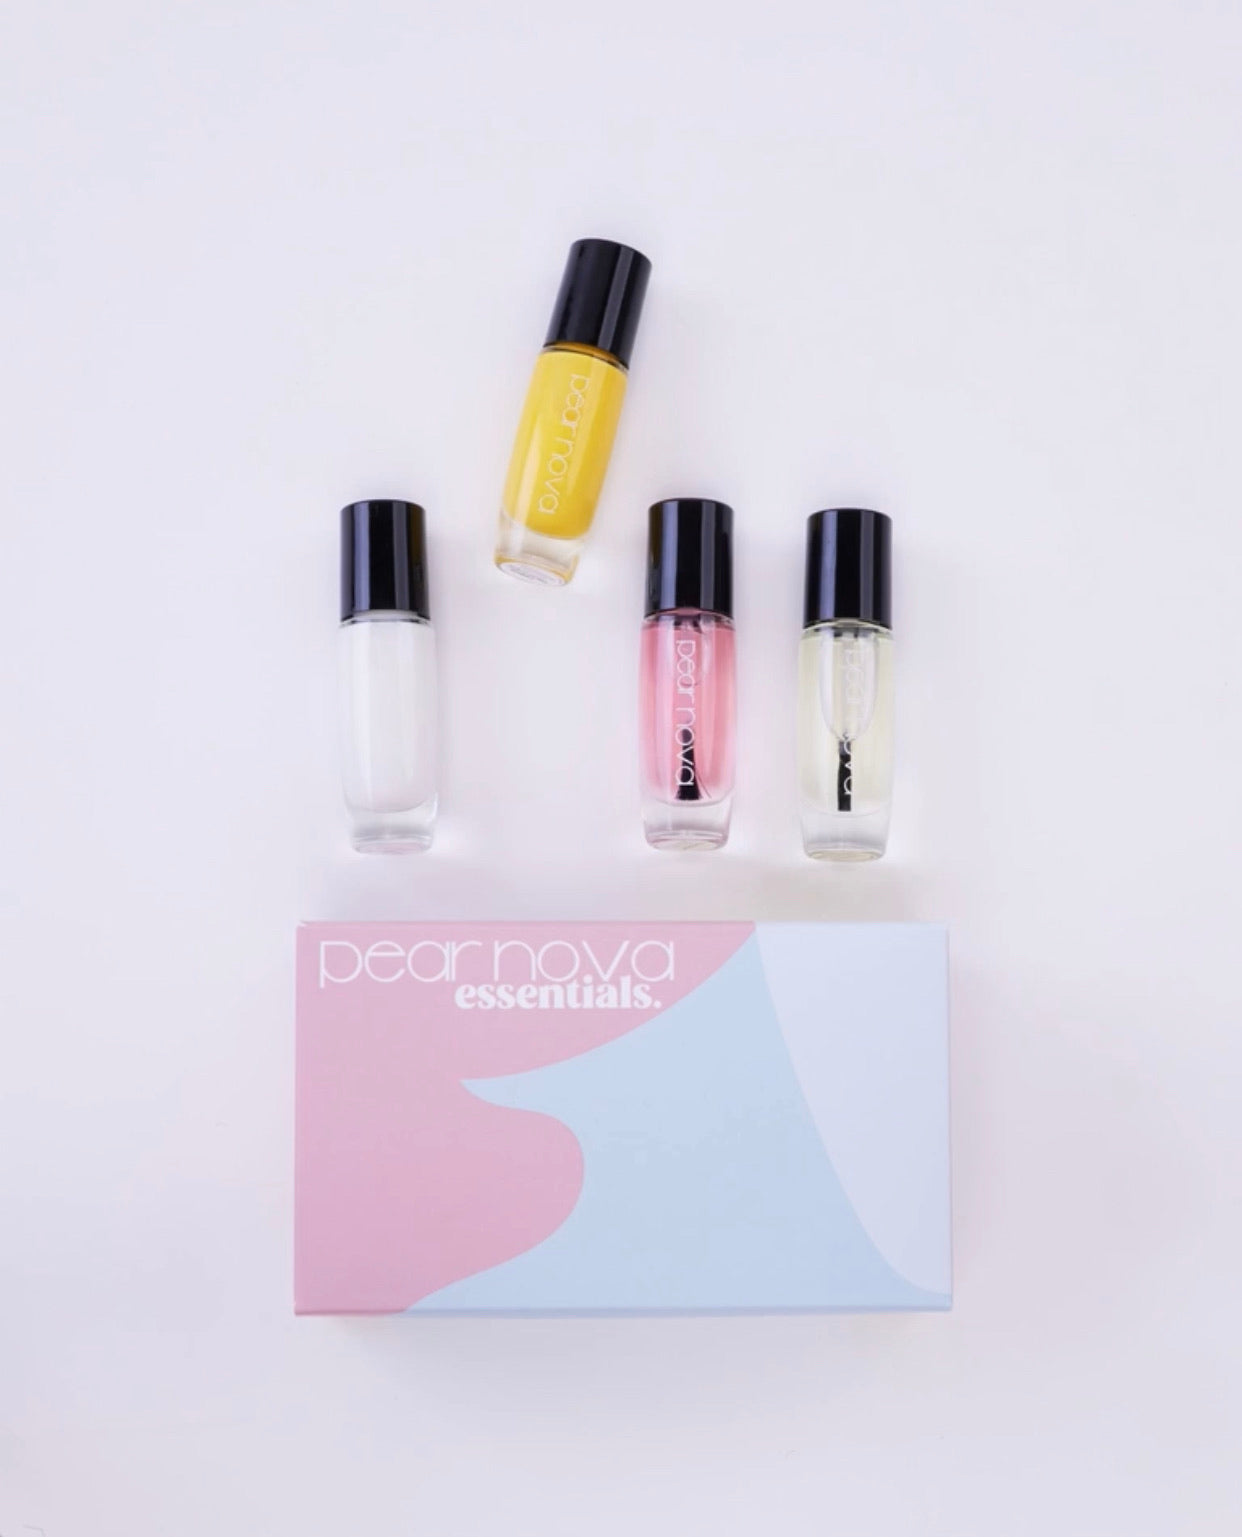 video of unboxing of classic essentials nail set with collection of nail polish colors to choose from